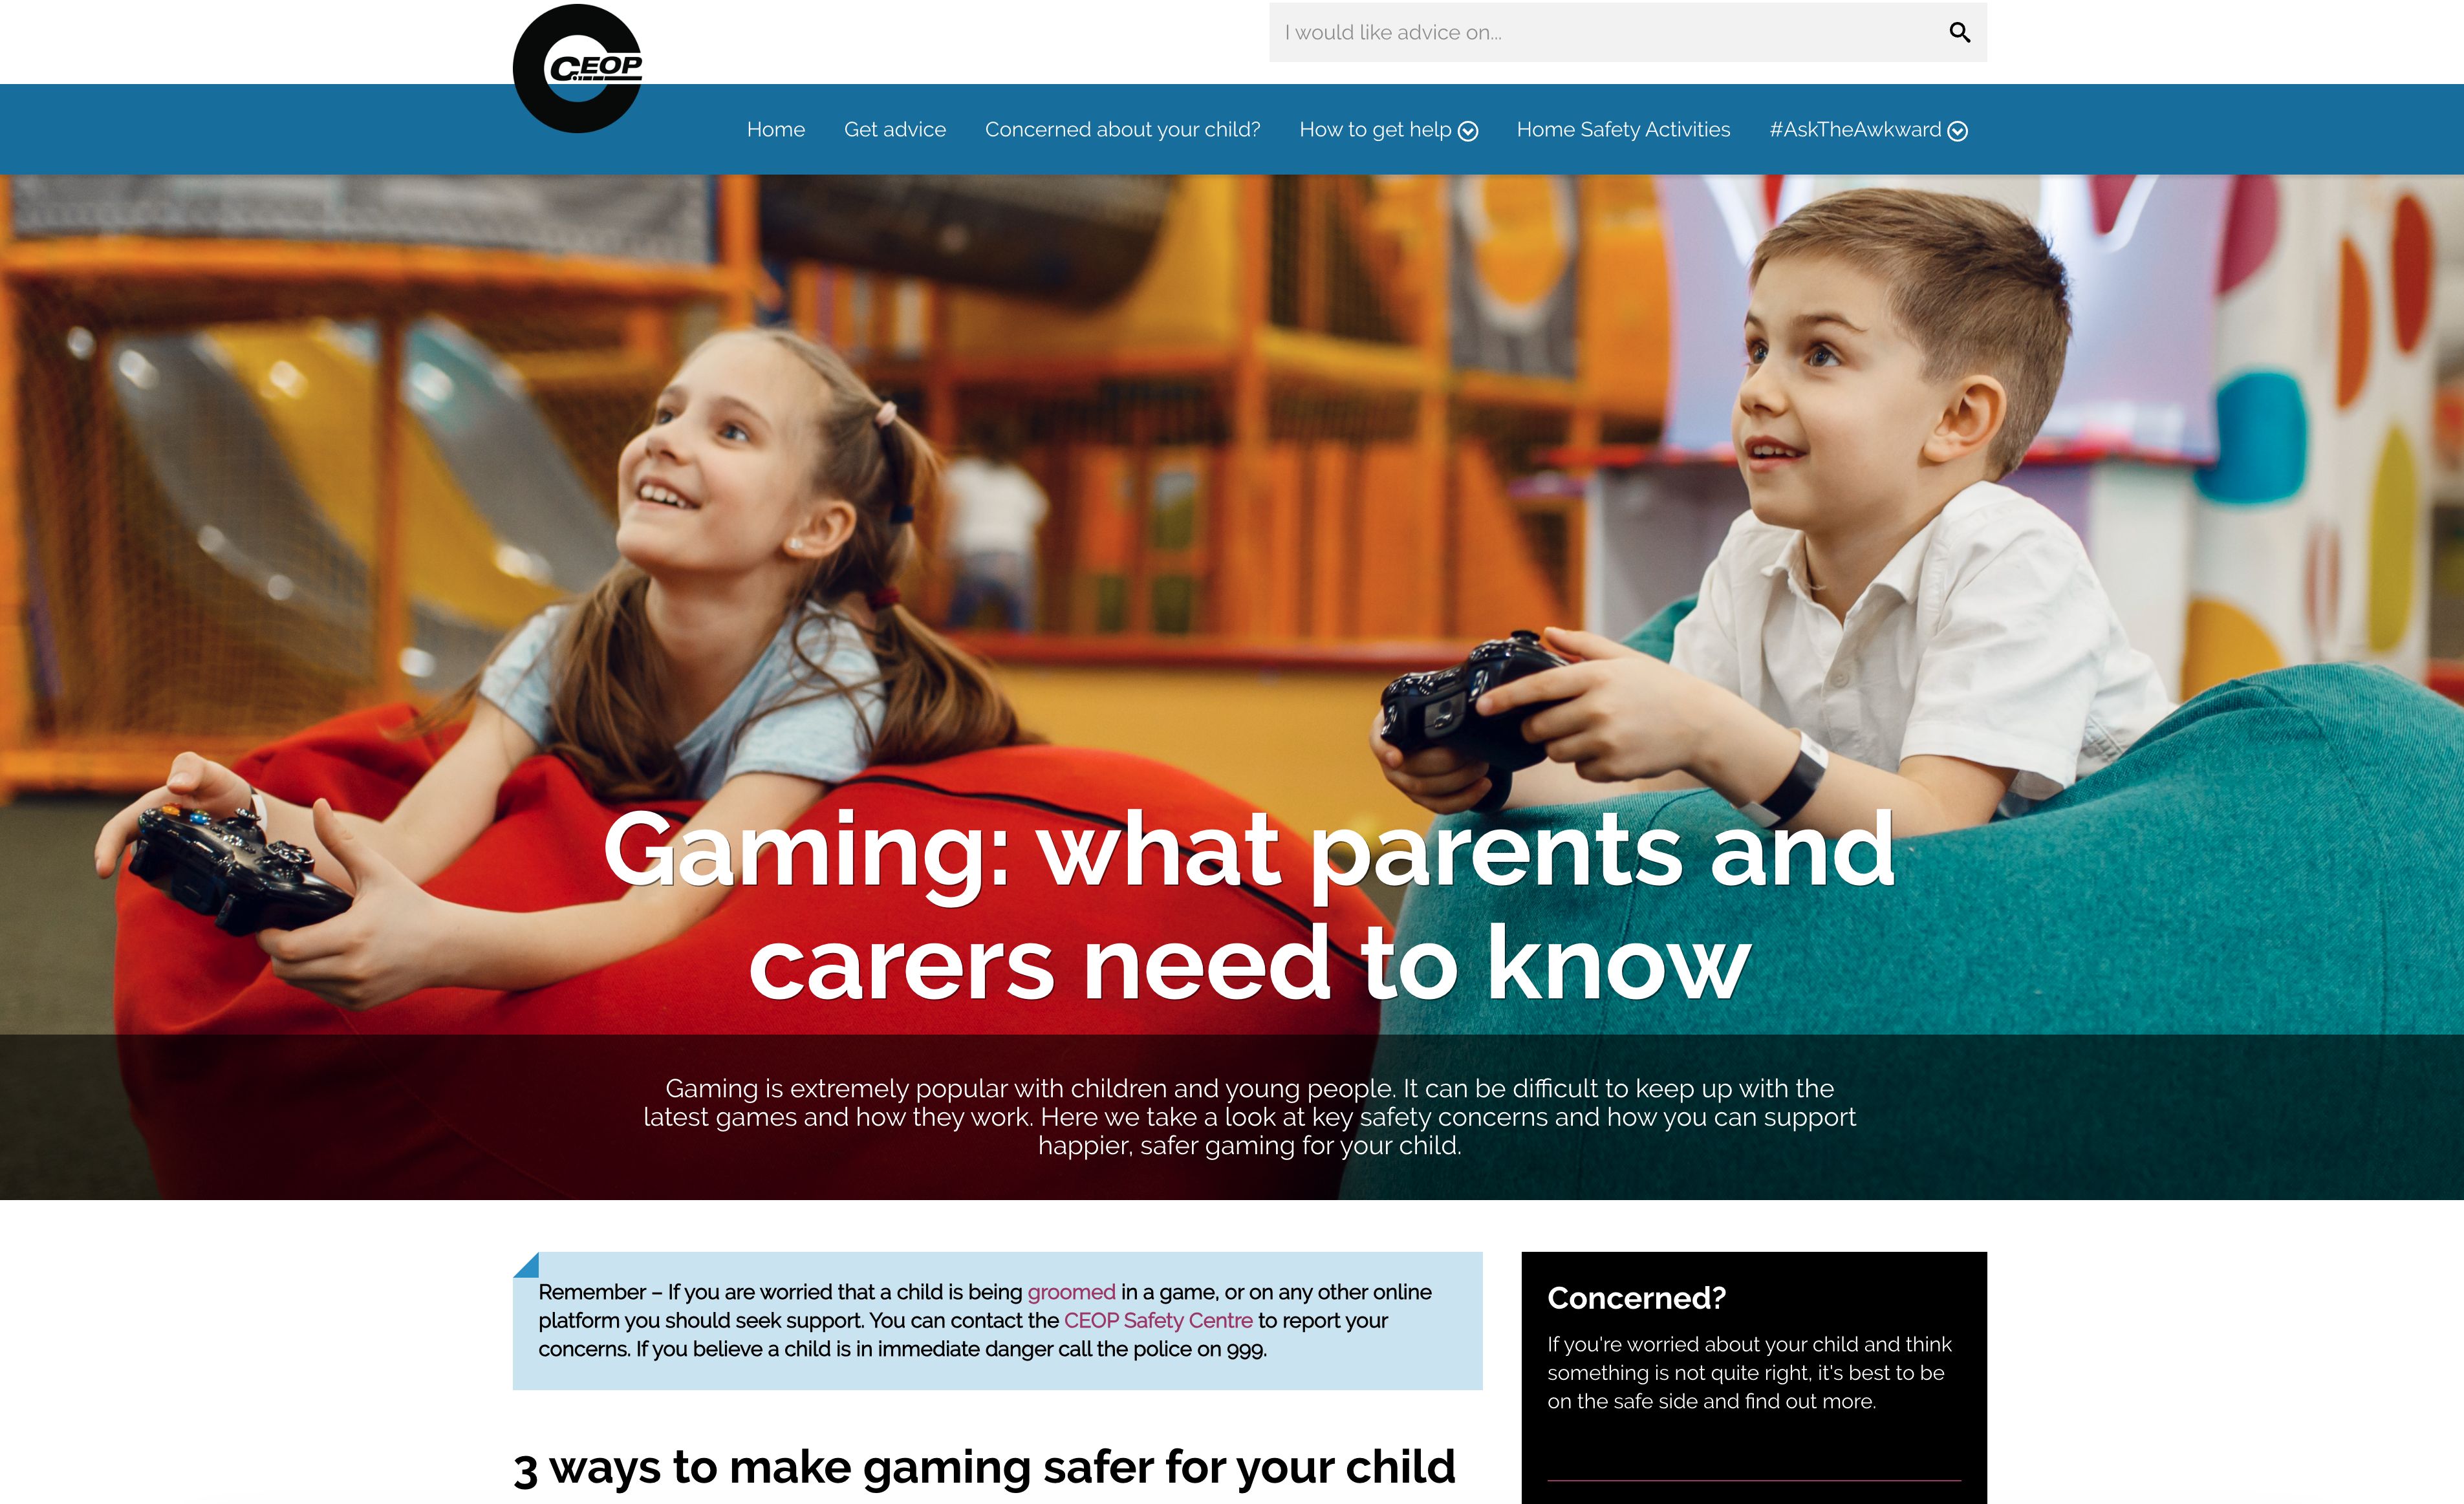 Gaming: what parents and carers need to know